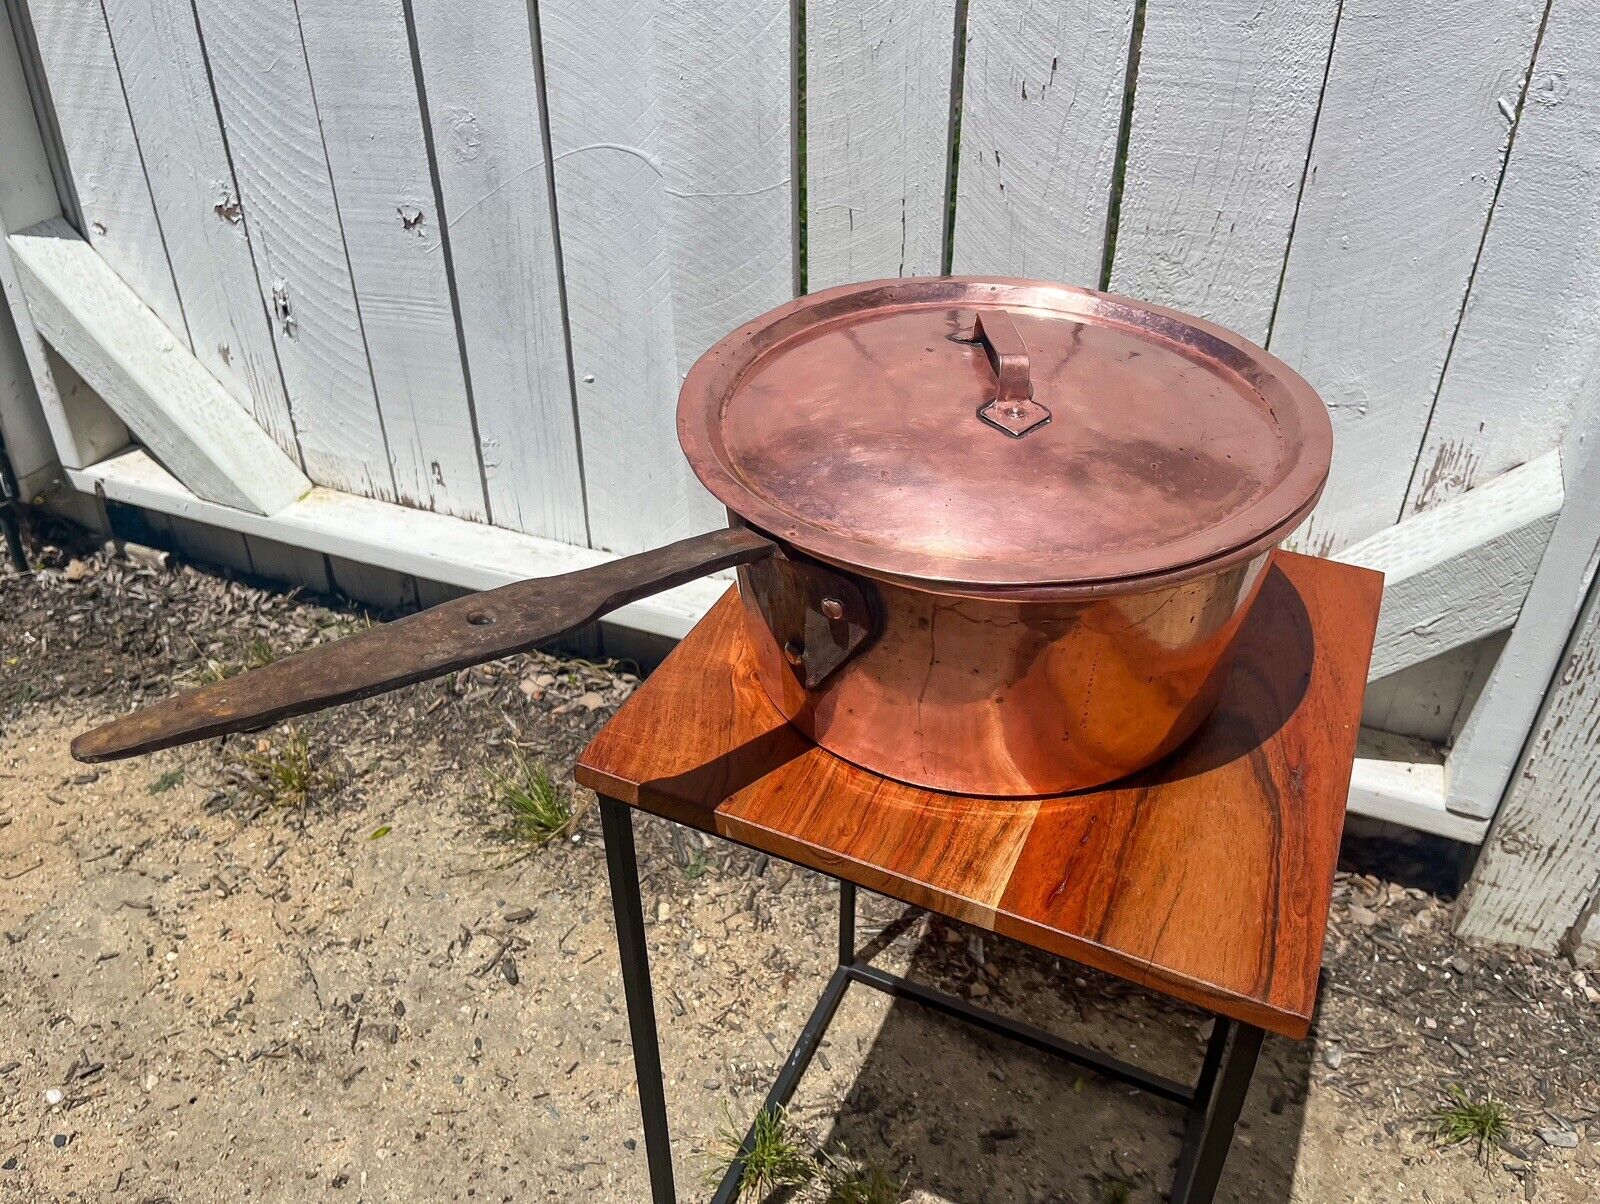 Antique Copper Pot & Lid Dovetailed Very Old Extra Large 12.5” Diameter Restored